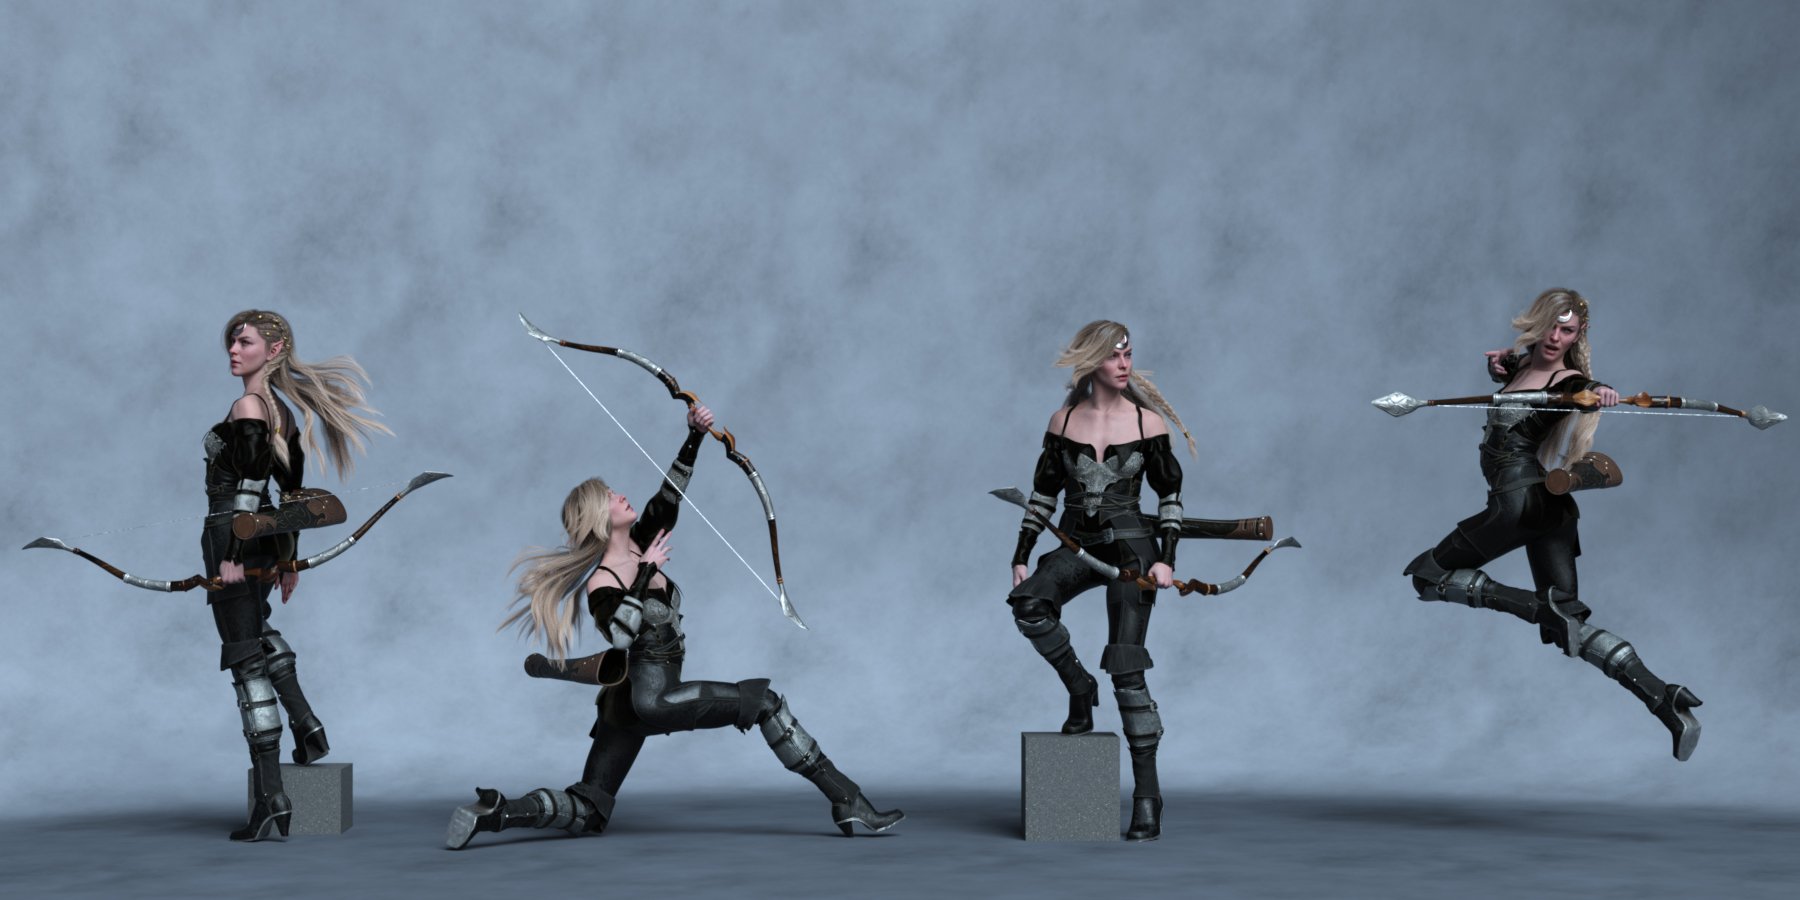 High Elven Archer Poses for Joan 9 High Elf by: Ensary, 3D Models by Daz 3D